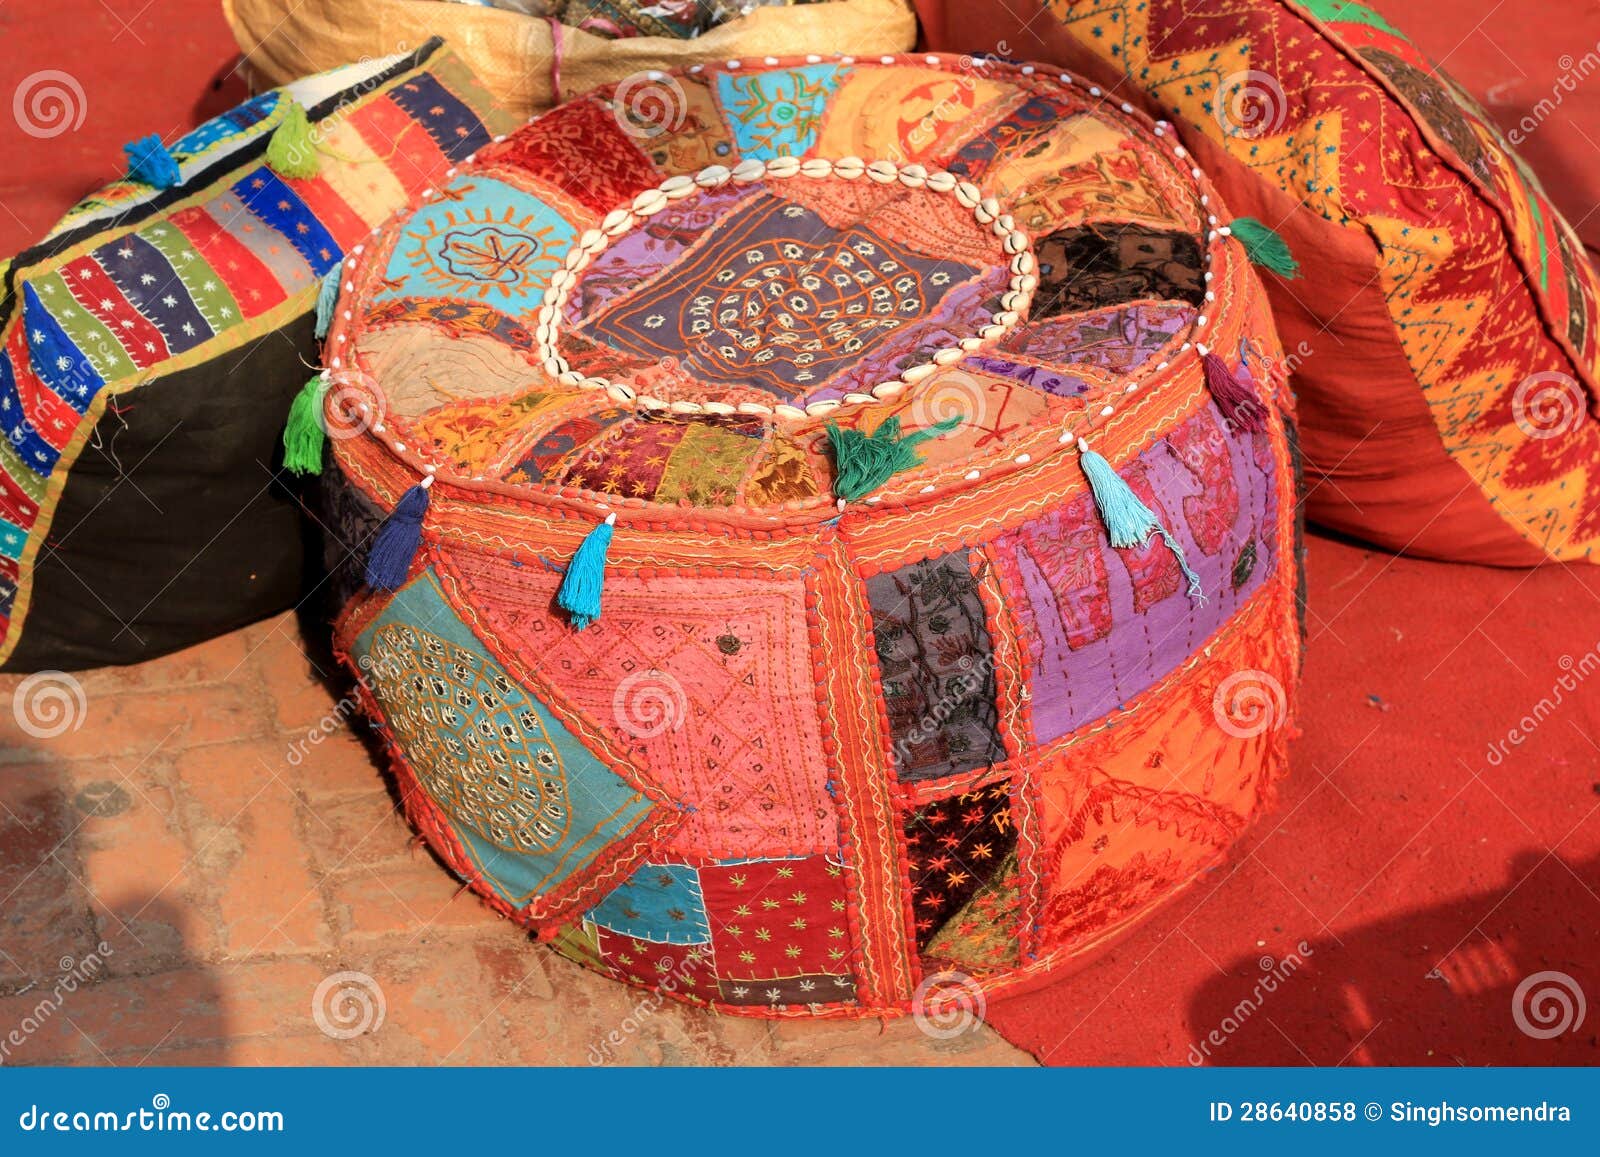 colorful hand made cushions and bean bag